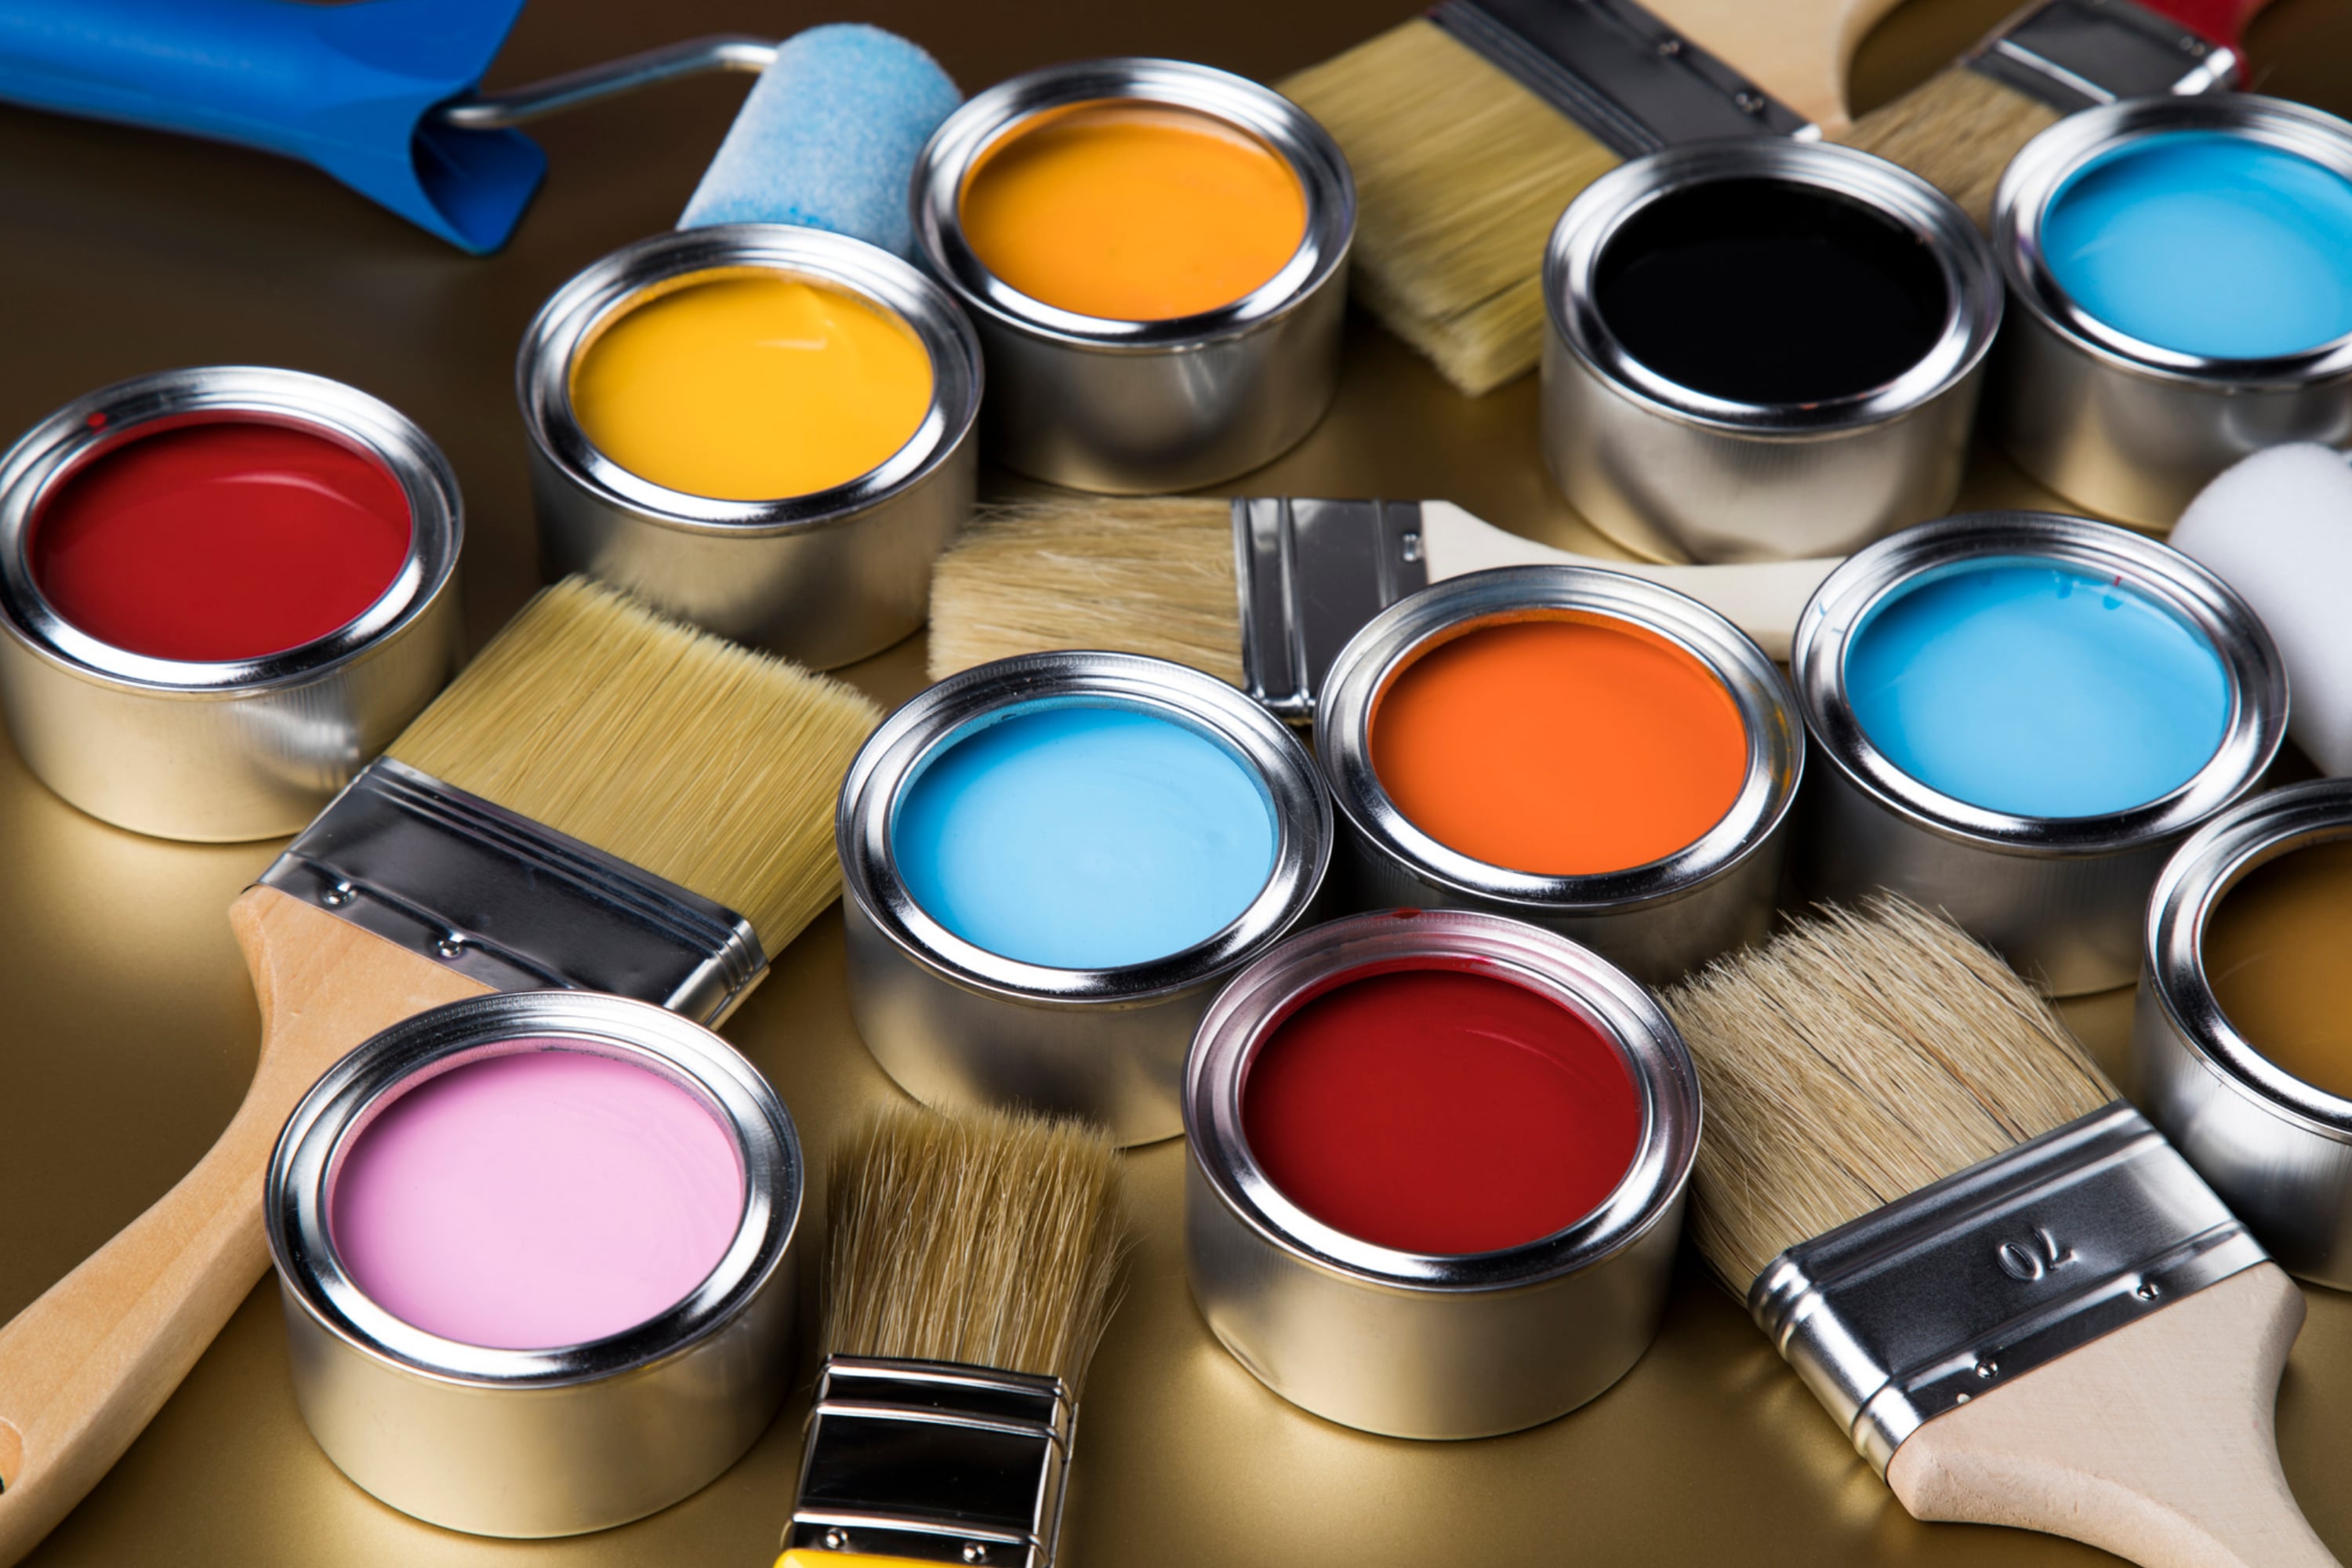 Tips for Selecting Paint Colors Based on Undertones